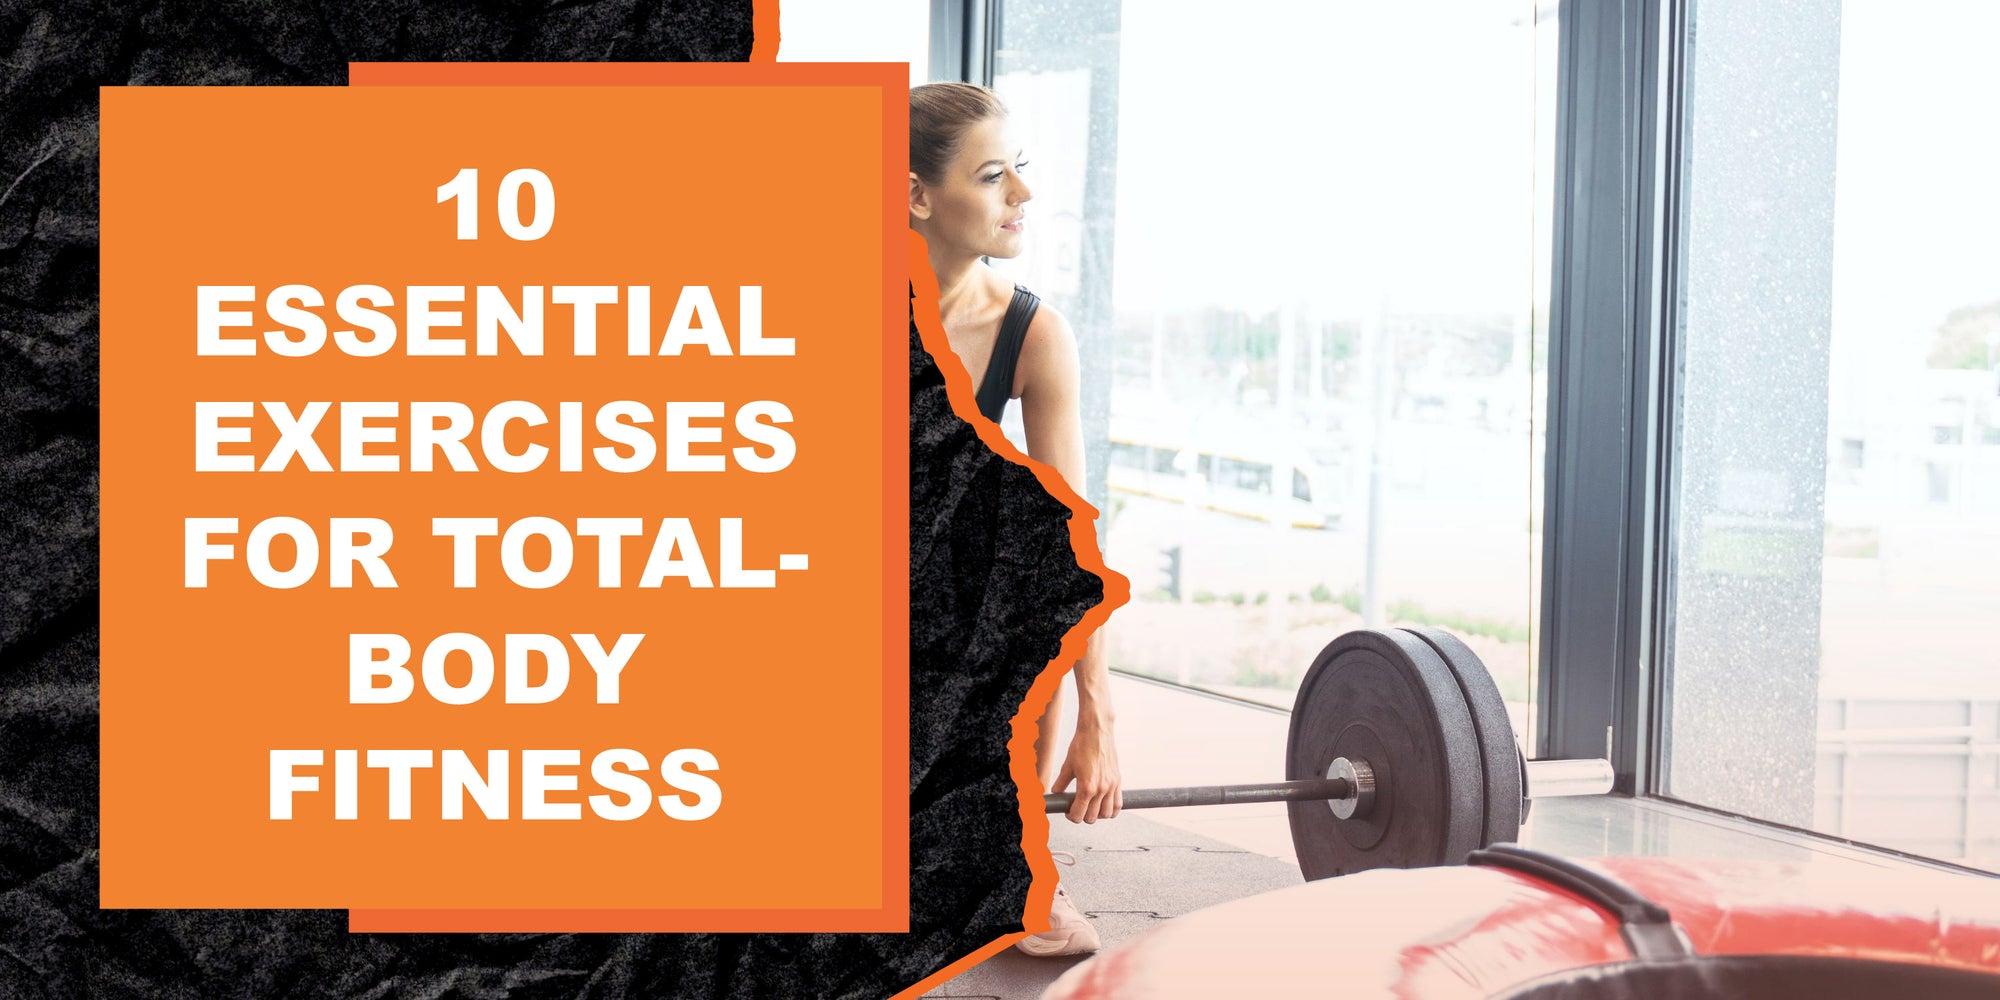 10 Essential Exercises for Total-Body Fitness